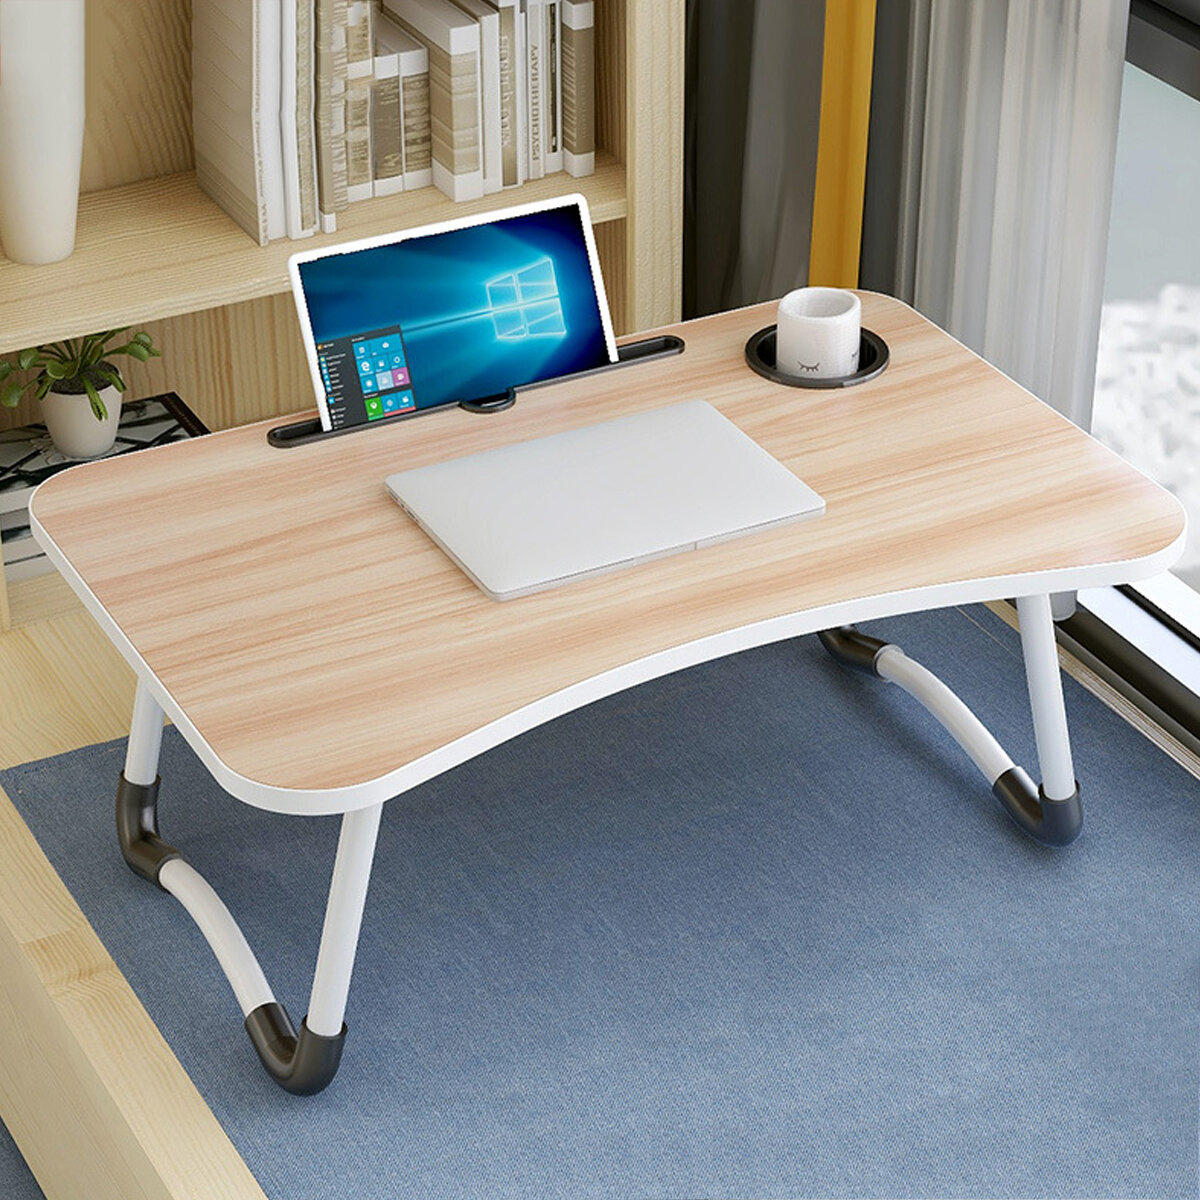 Folding Laptop Table with Slot Hole Notebook Table College Student Dormitory for Bedside Sofa Study Desk